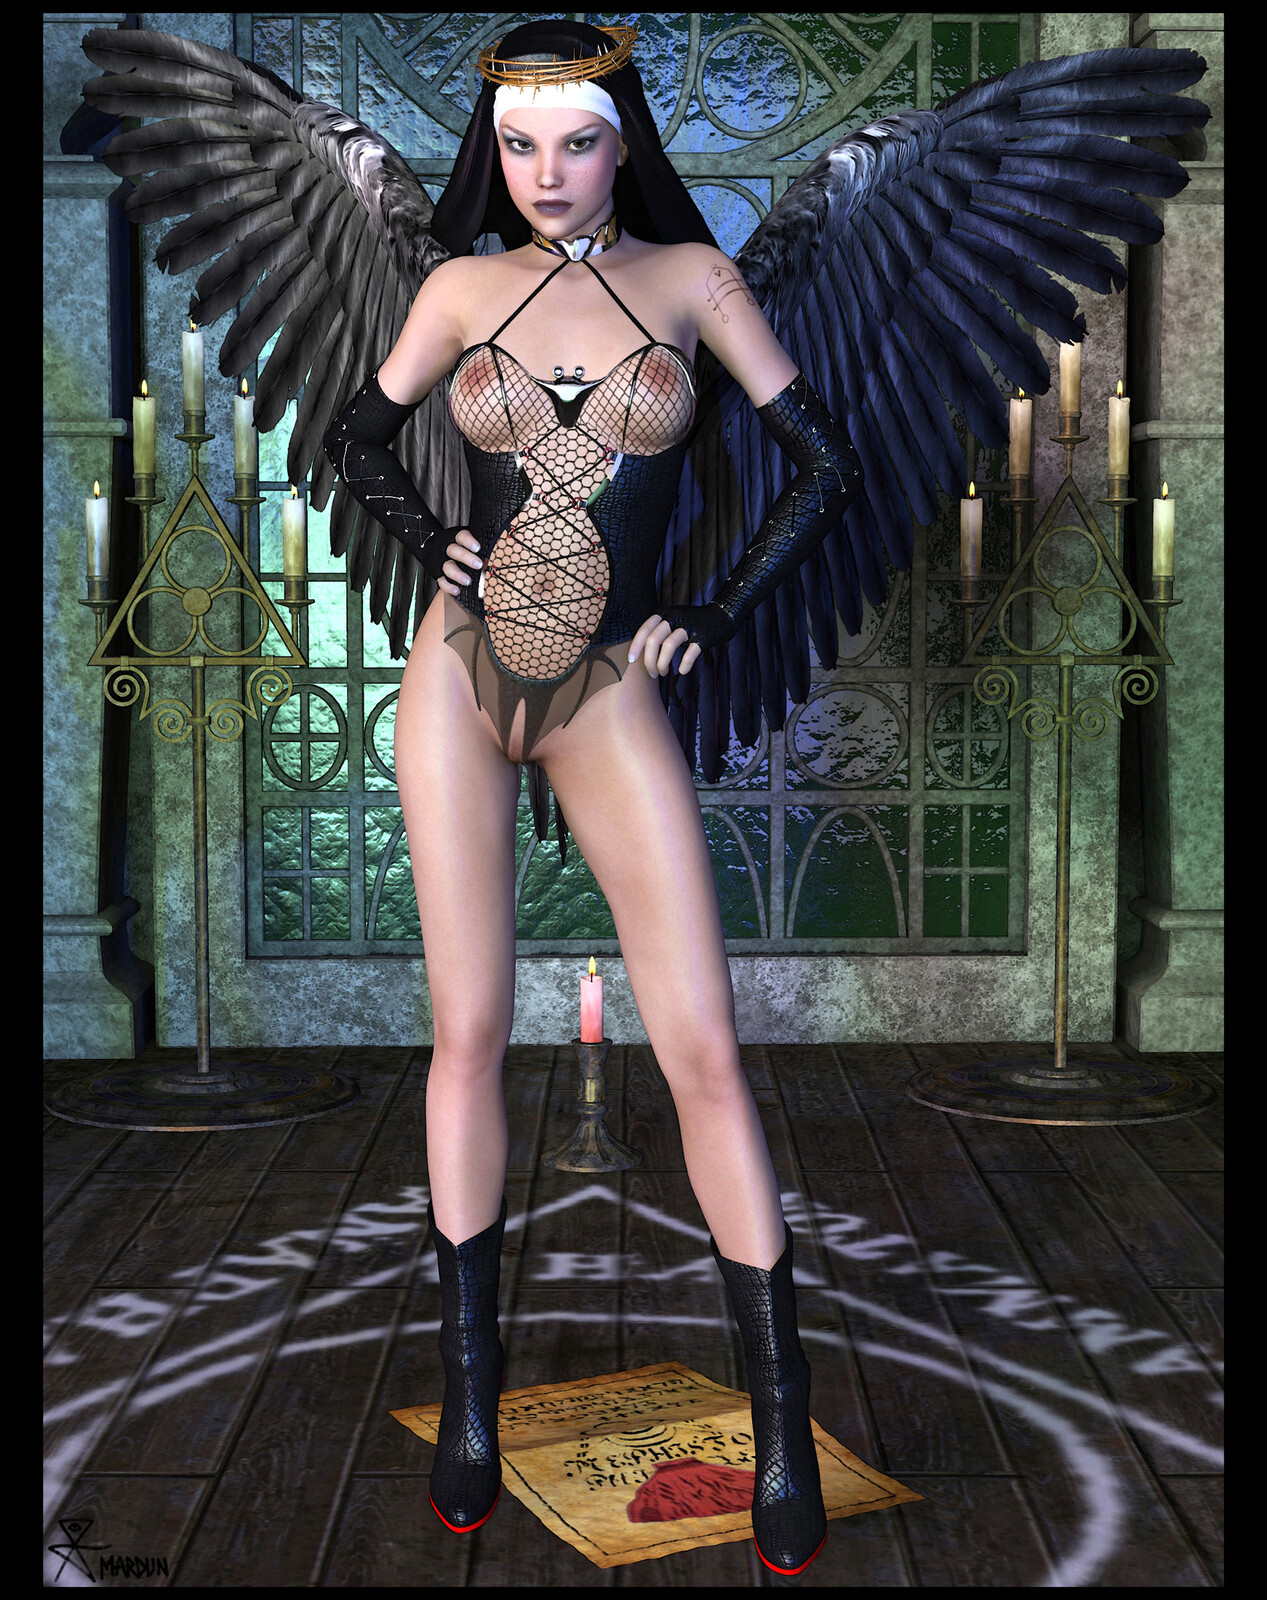 Mephistophina Succubus. Contract and Sigils are derived from medieval grimoires.